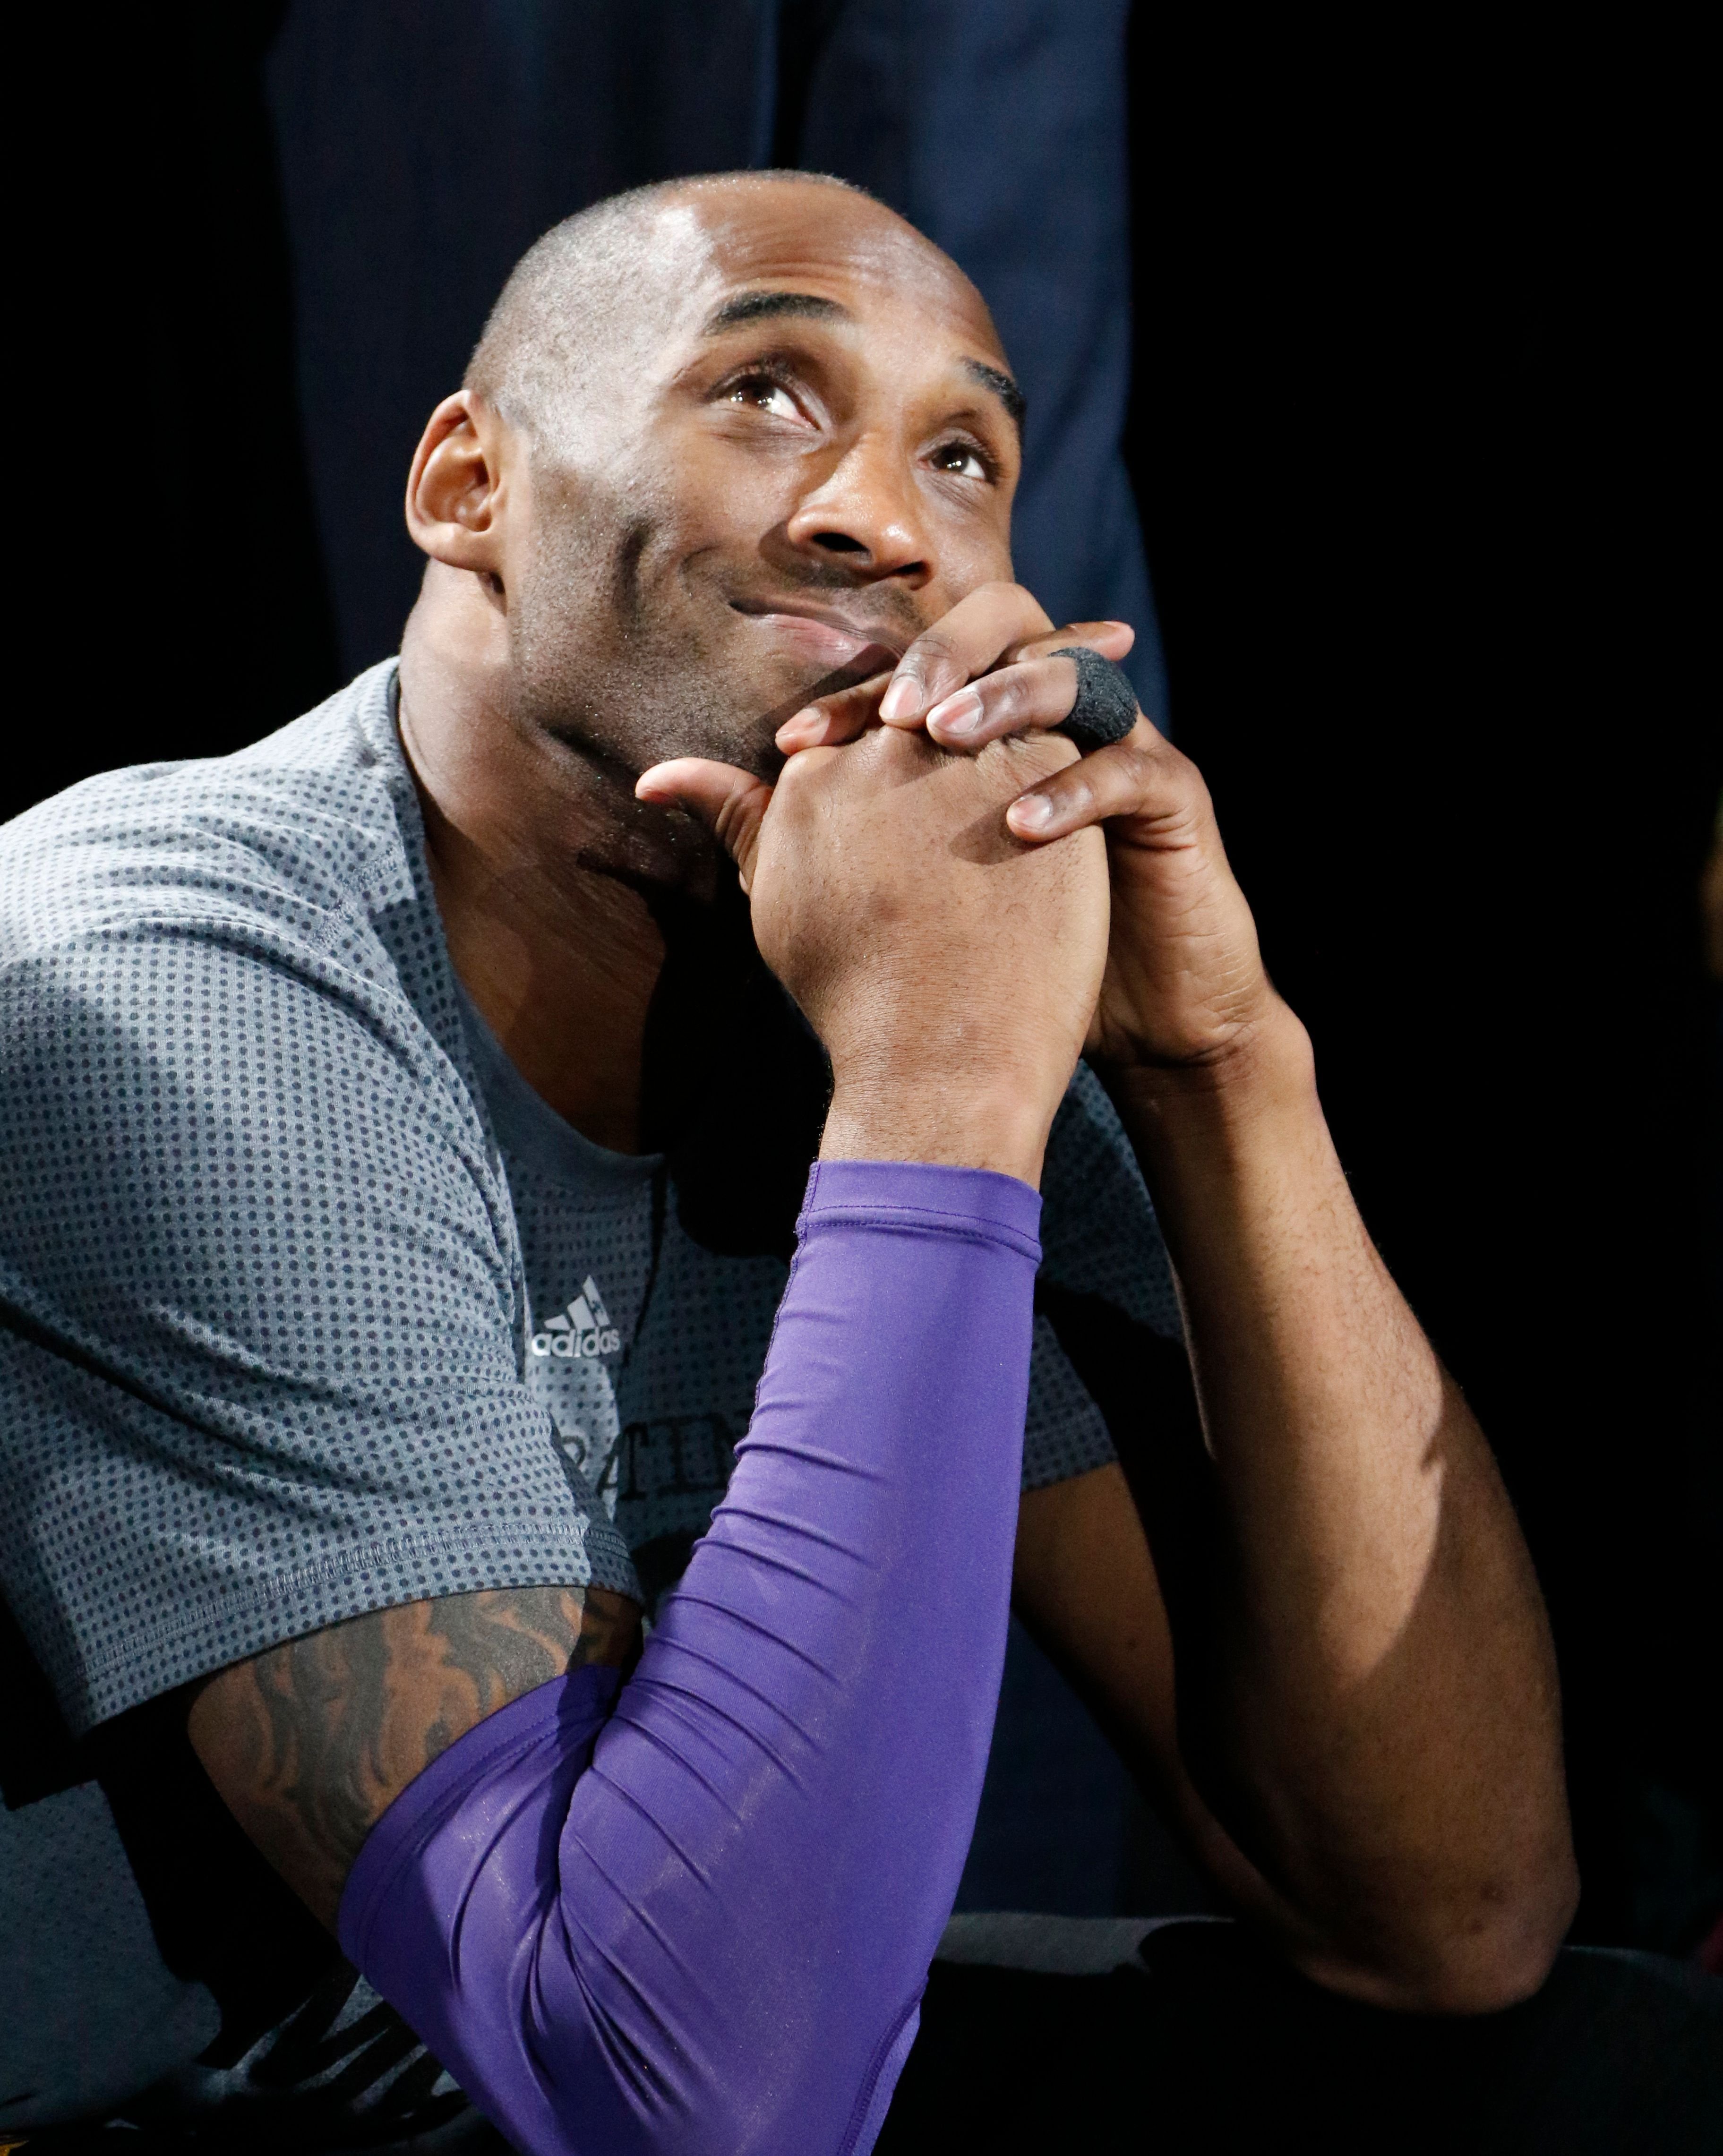 Kobe Bryant at AT&T Center on February 6, 2016 in San Antonio, Texas. | Photo: Getty Images